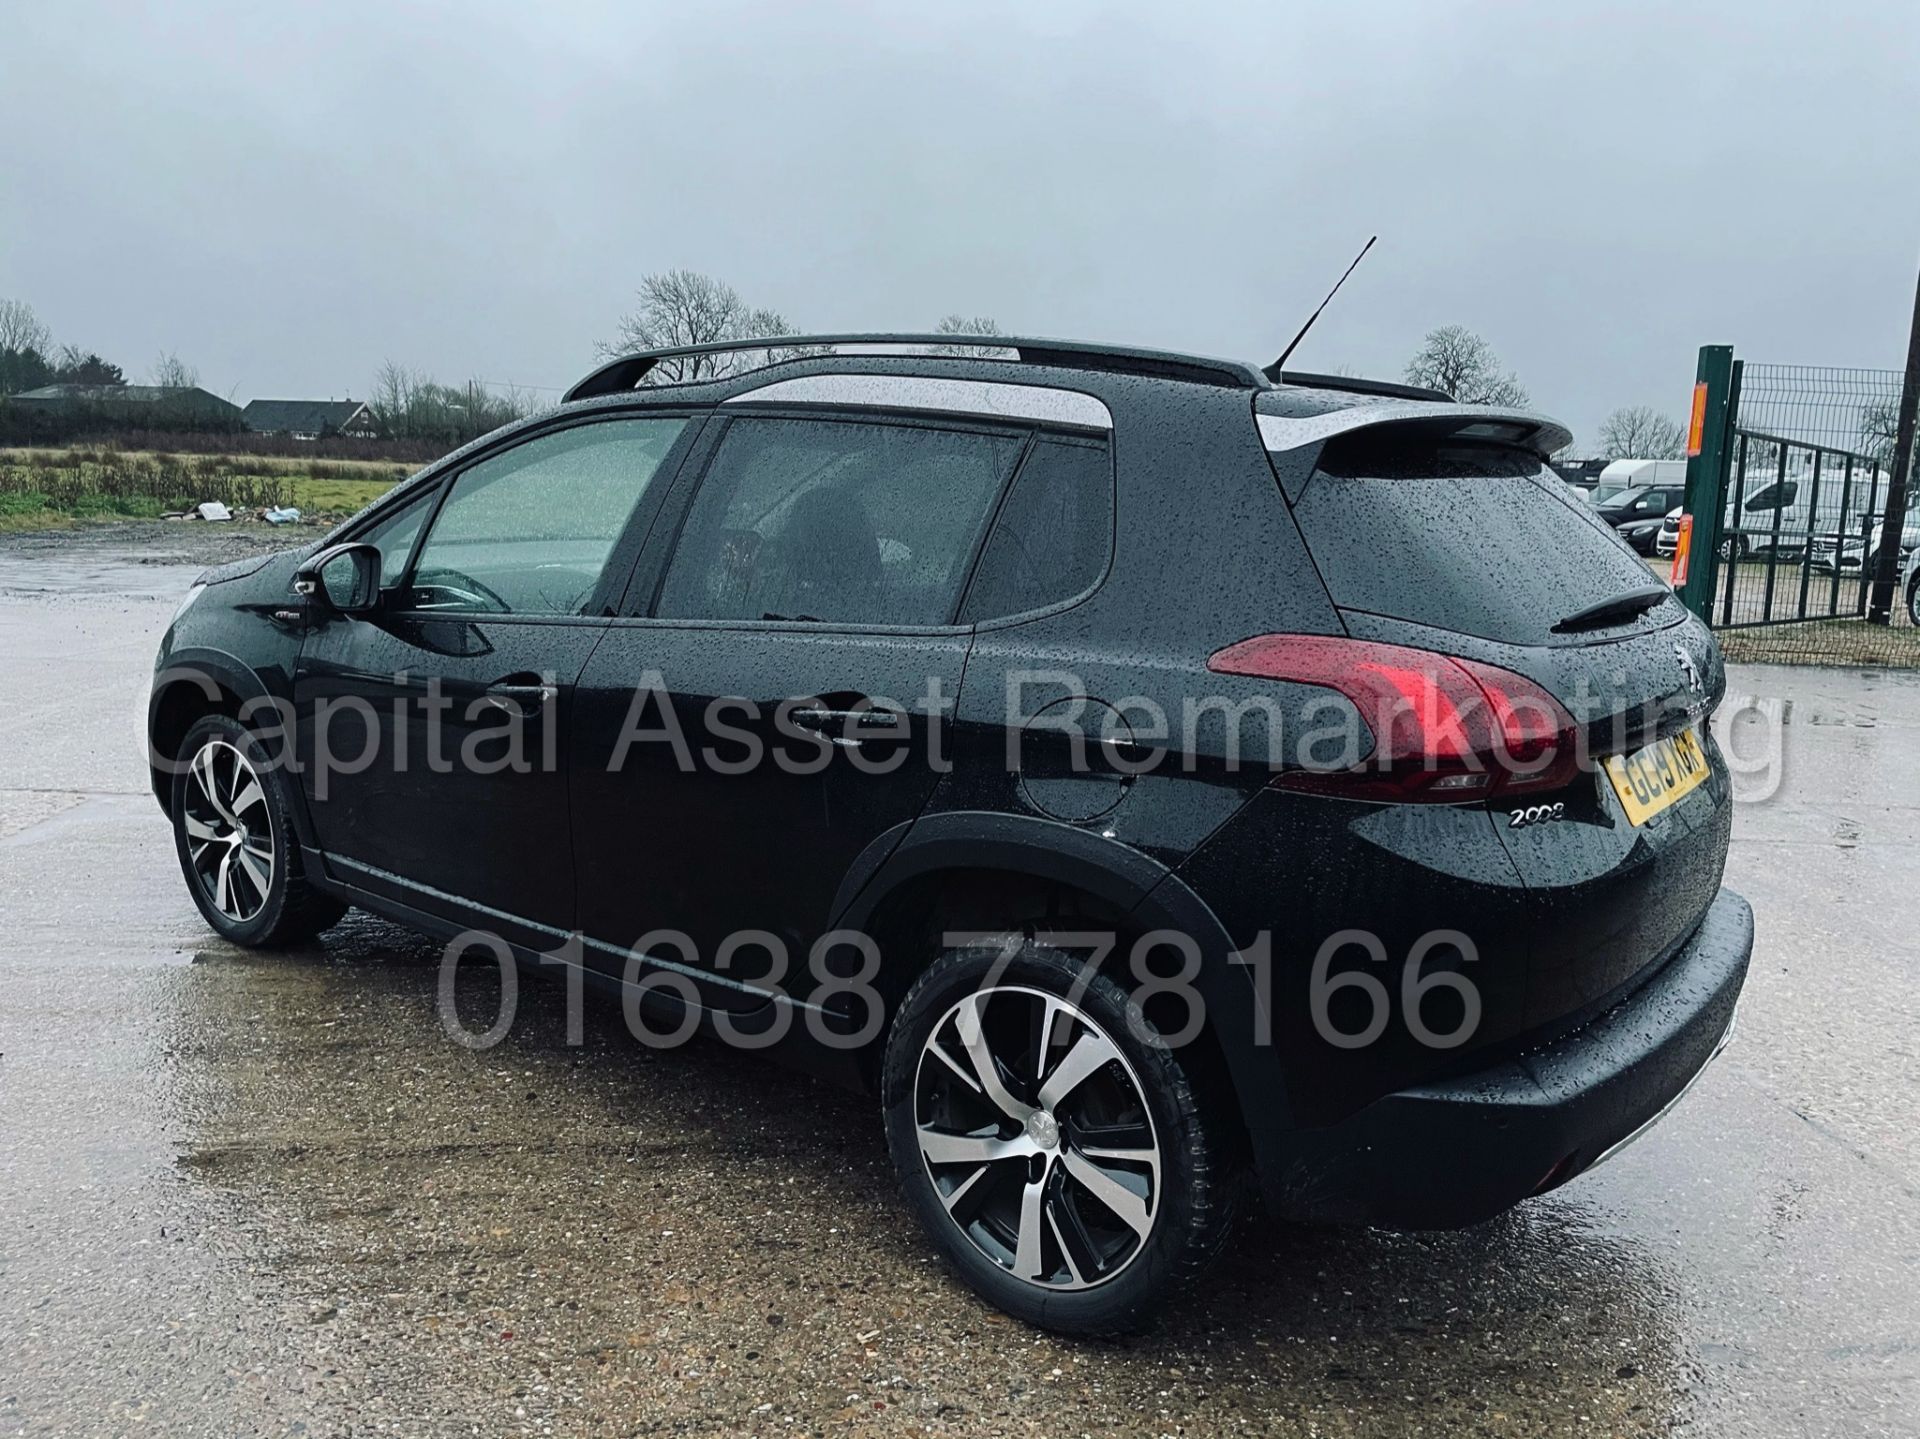 PEUGEOT 2008 *GT LINE* SUV / MPV (2019 - EURO 6) '1.5 BLUE HDI' *SAT NAV - PAN ROOF' *LOW MILES* - Image 9 of 46